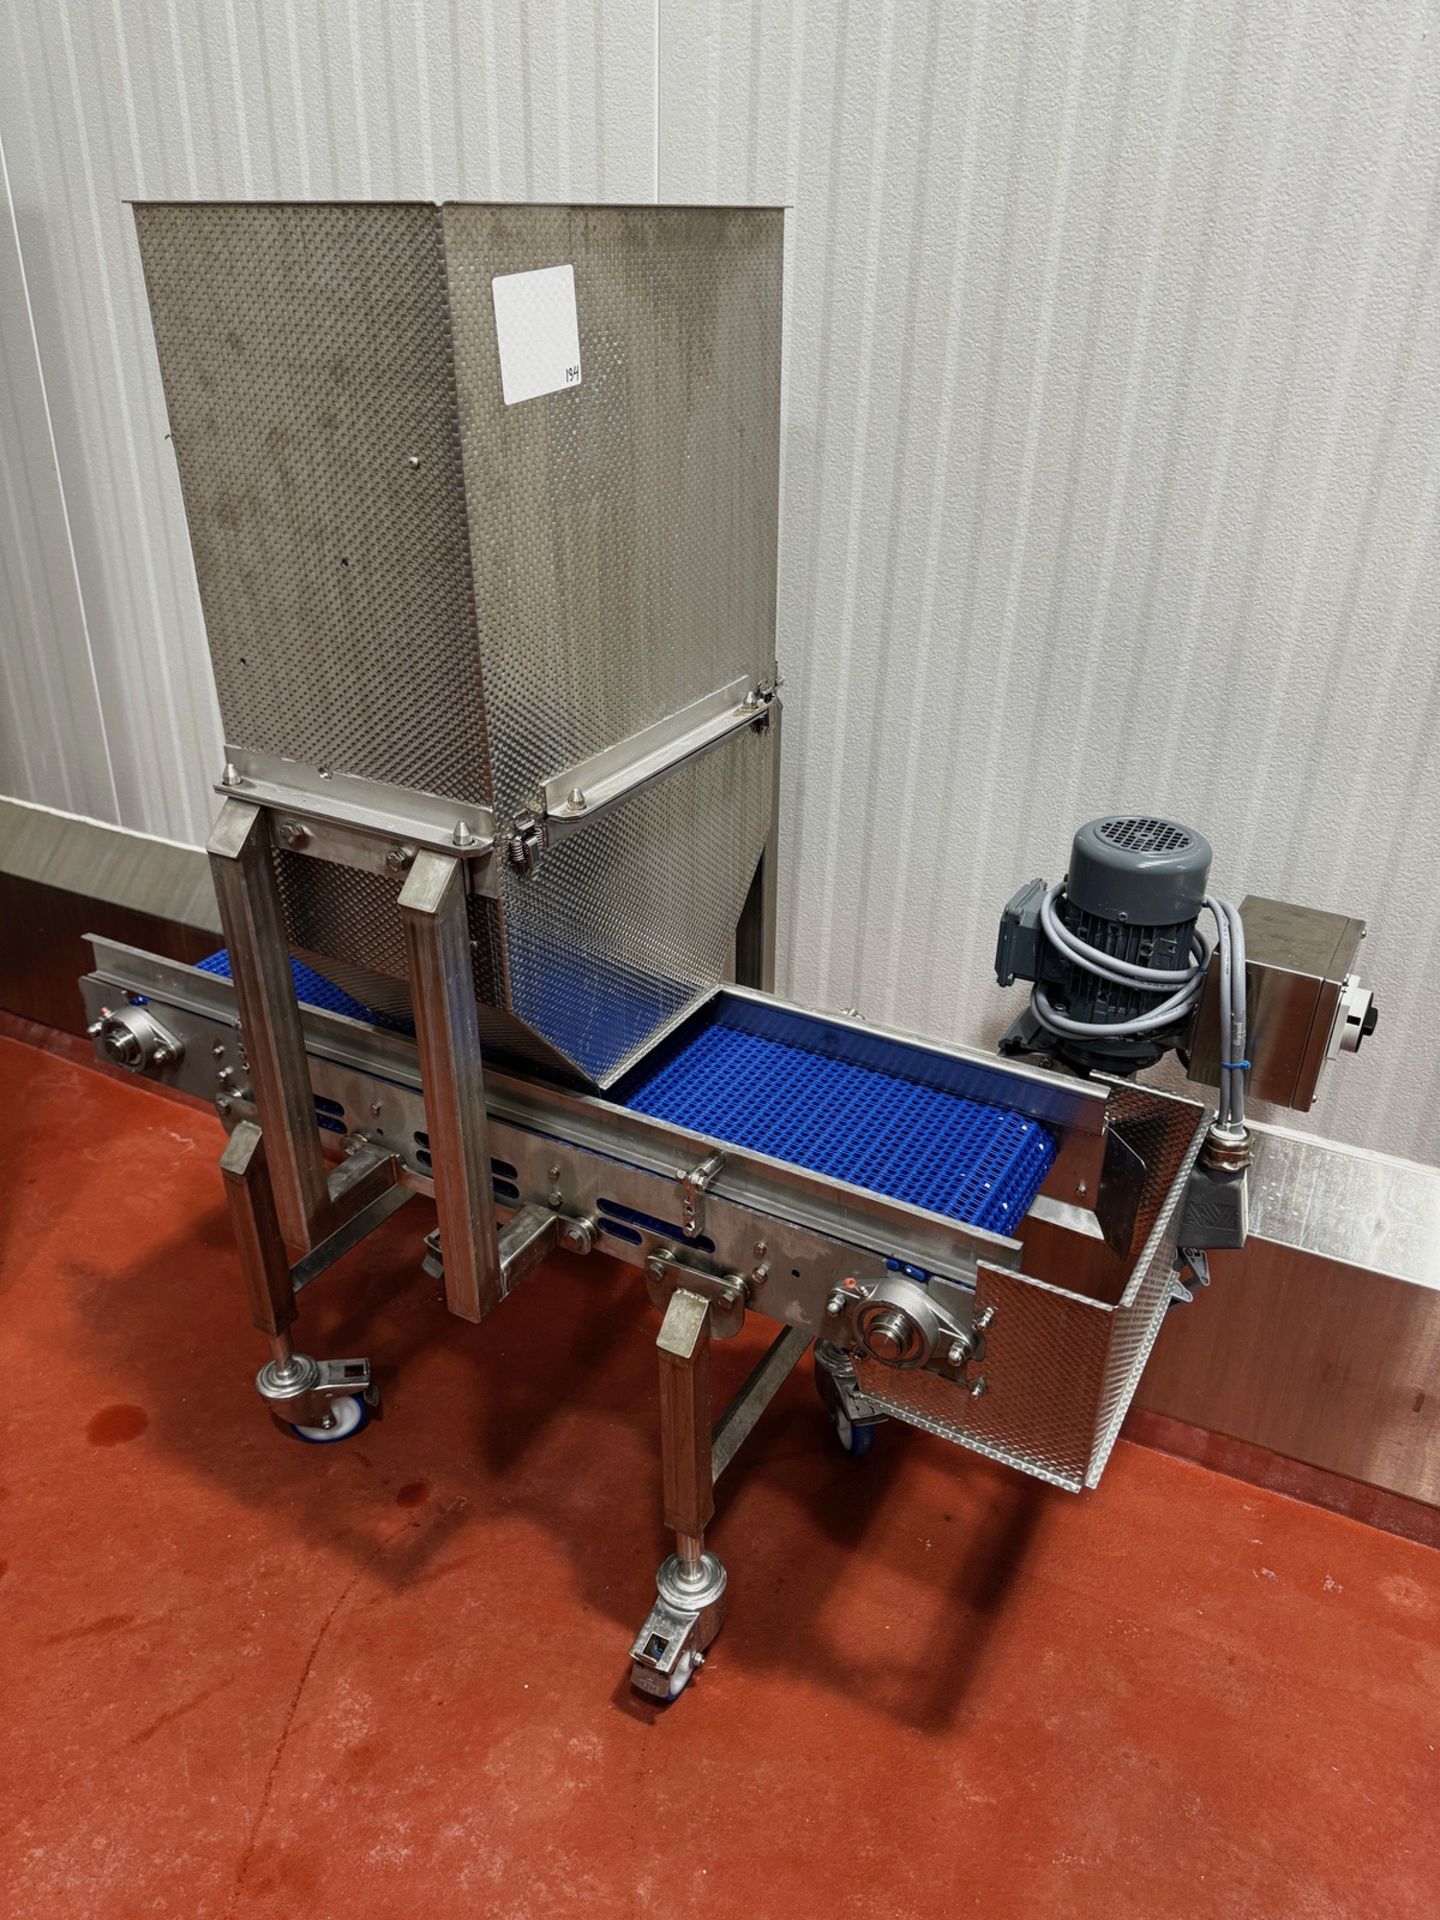 Stainless Steel Frame 10" x 42" Depositing Conveyor, VS Control, Dimple Surface hopper, Mounted on C